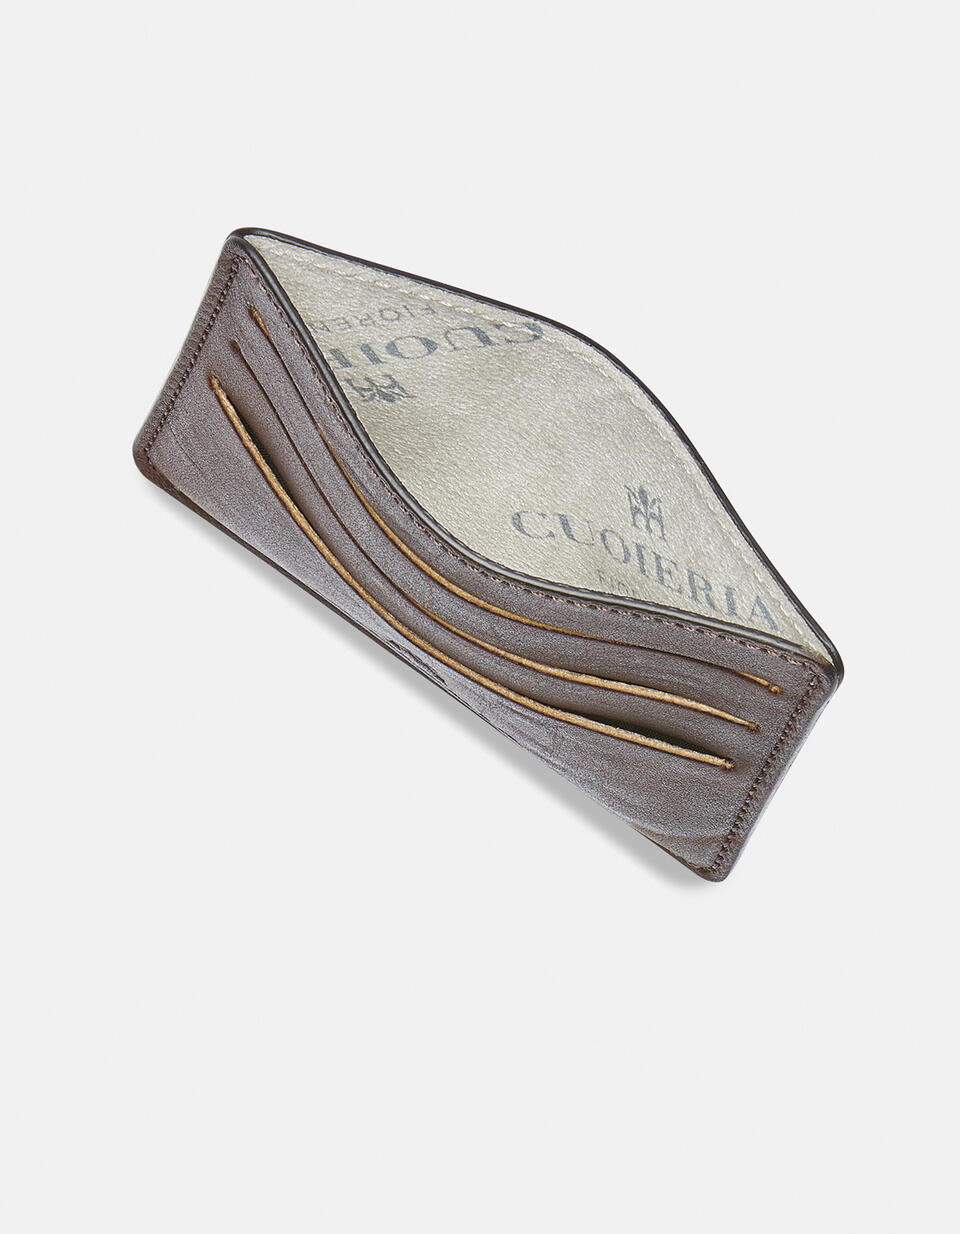 Bourbon credit card holder with banknote holder opening - Card Holders - Men's Wallets | Wallets TESTA DI MORO - Card Holders - Men's Wallets | WalletsCuoieria Fiorentina